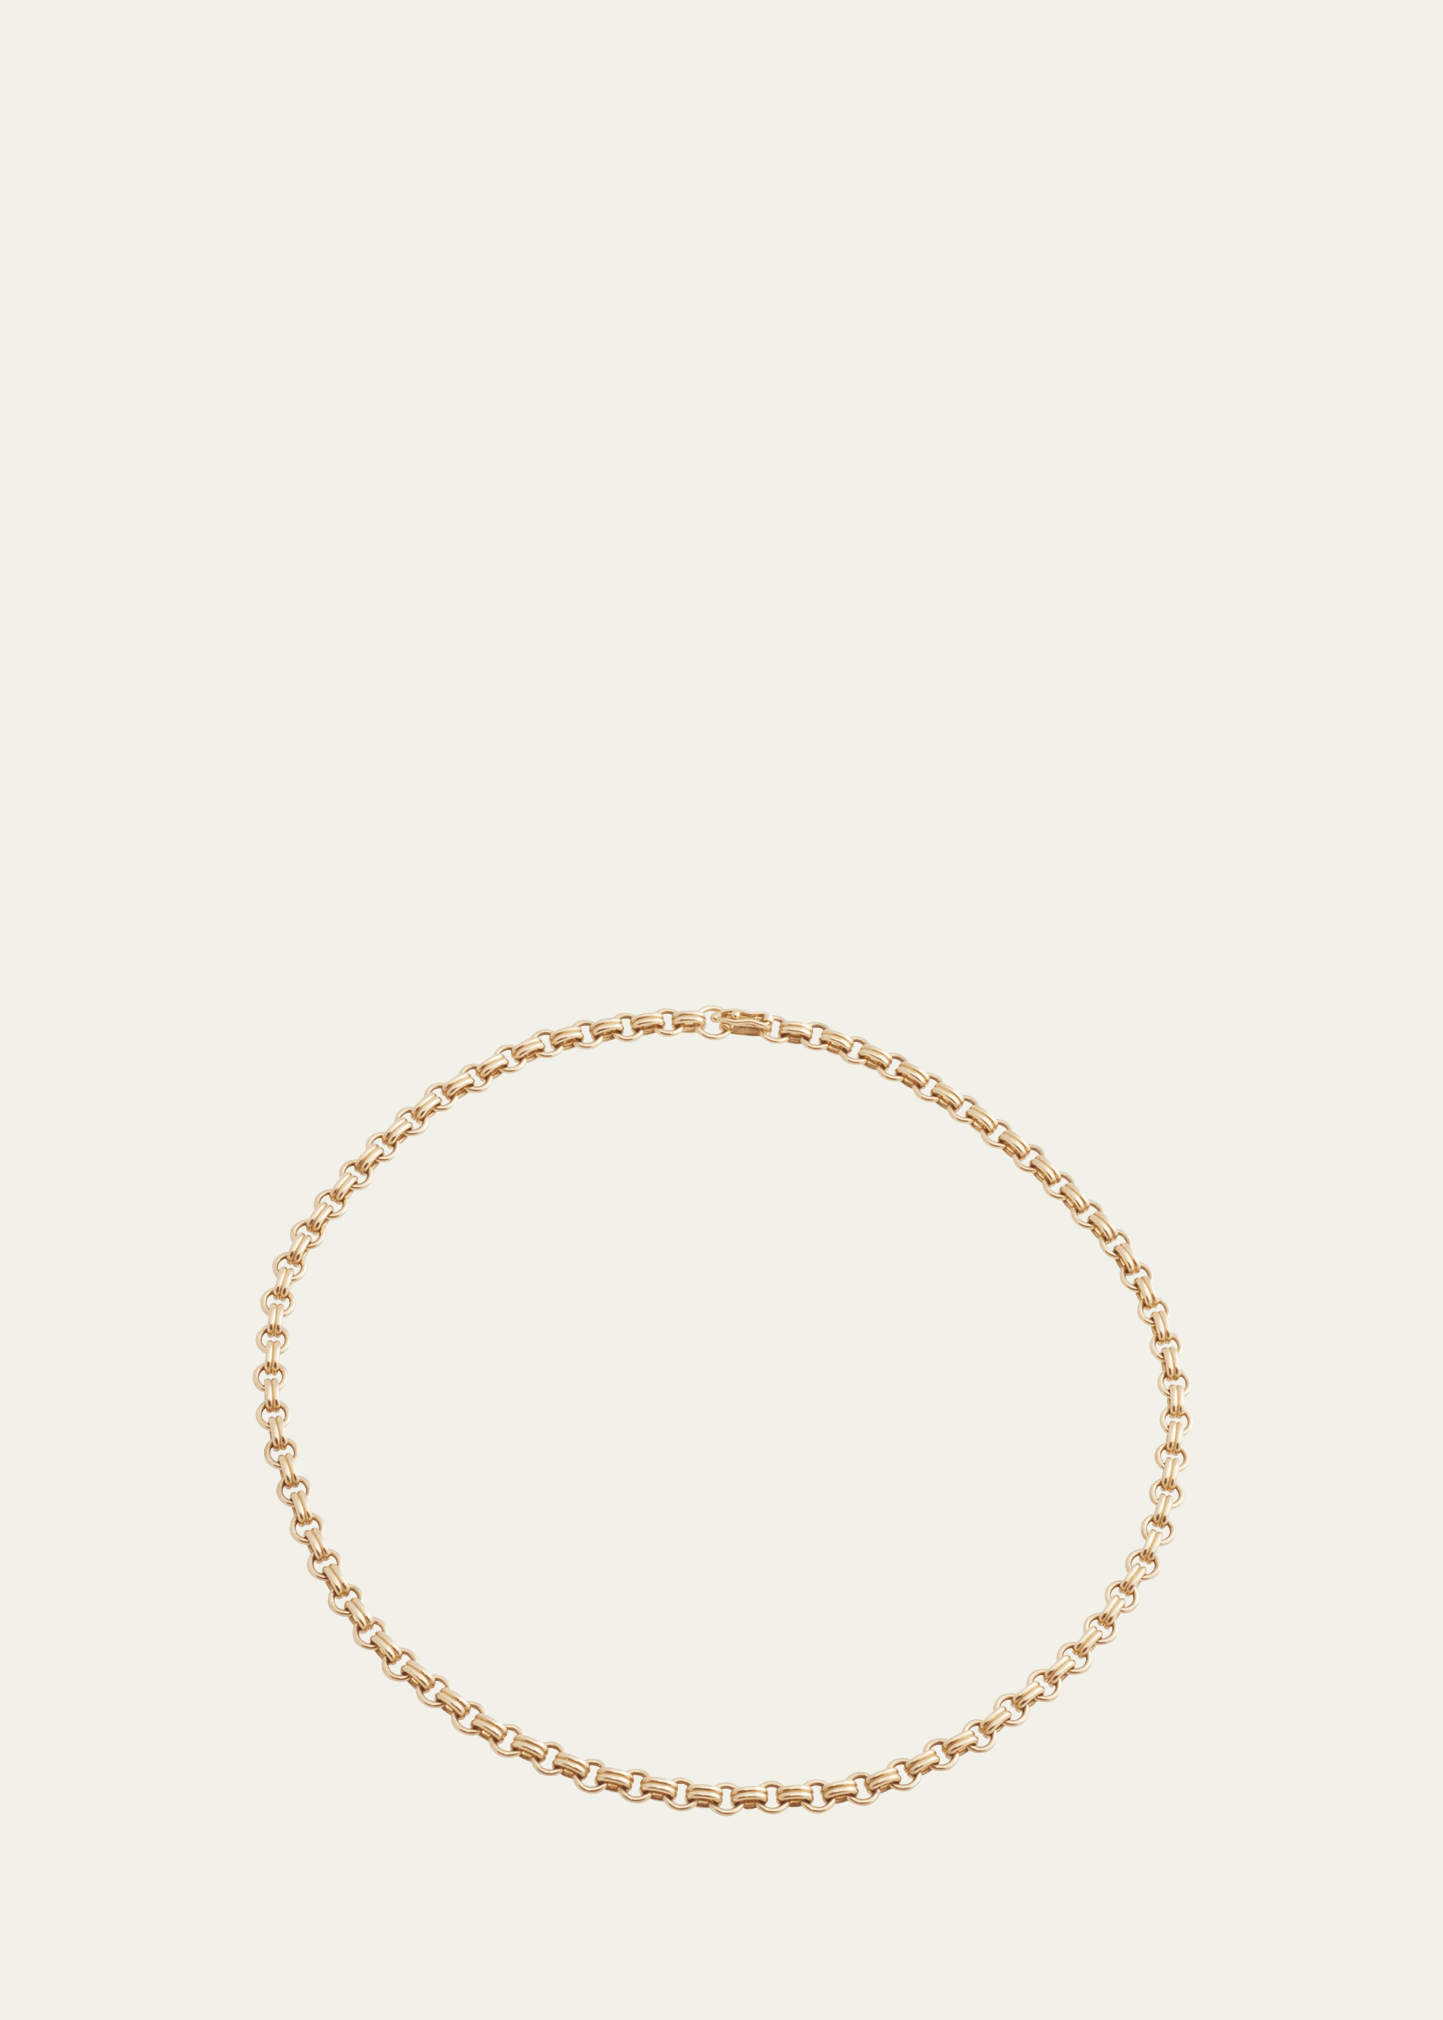 18K Yellow Gold Double Chain Necklace with Small Links, 16"L